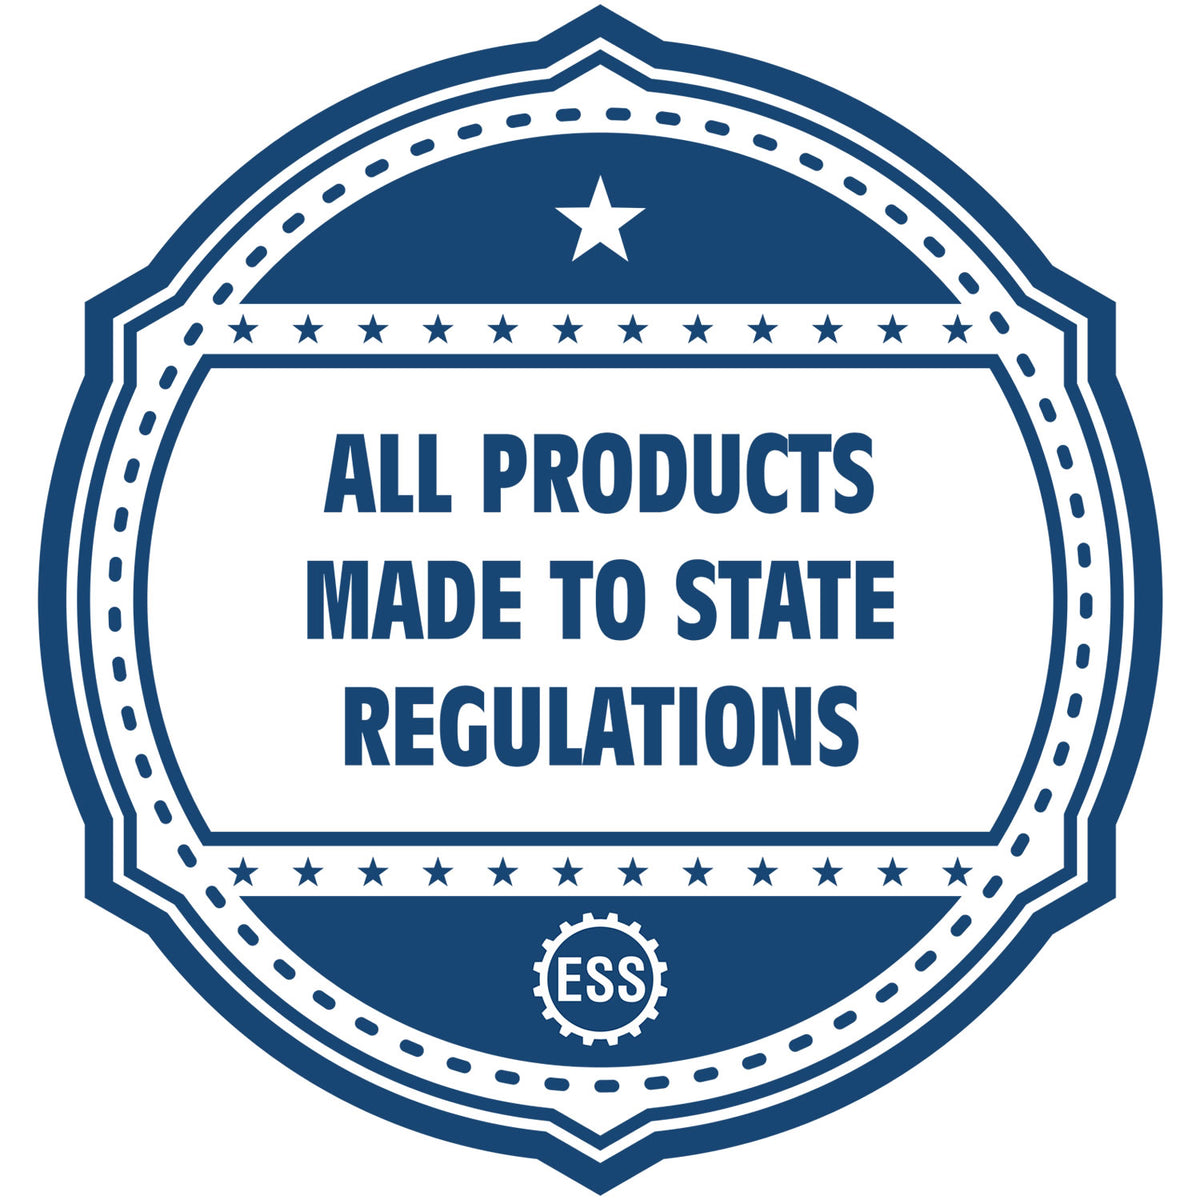 An icon or badge element for the Extended Long Reach South Dakota Architect Seal Embosser showing that this product is made in compliance with state regulations.